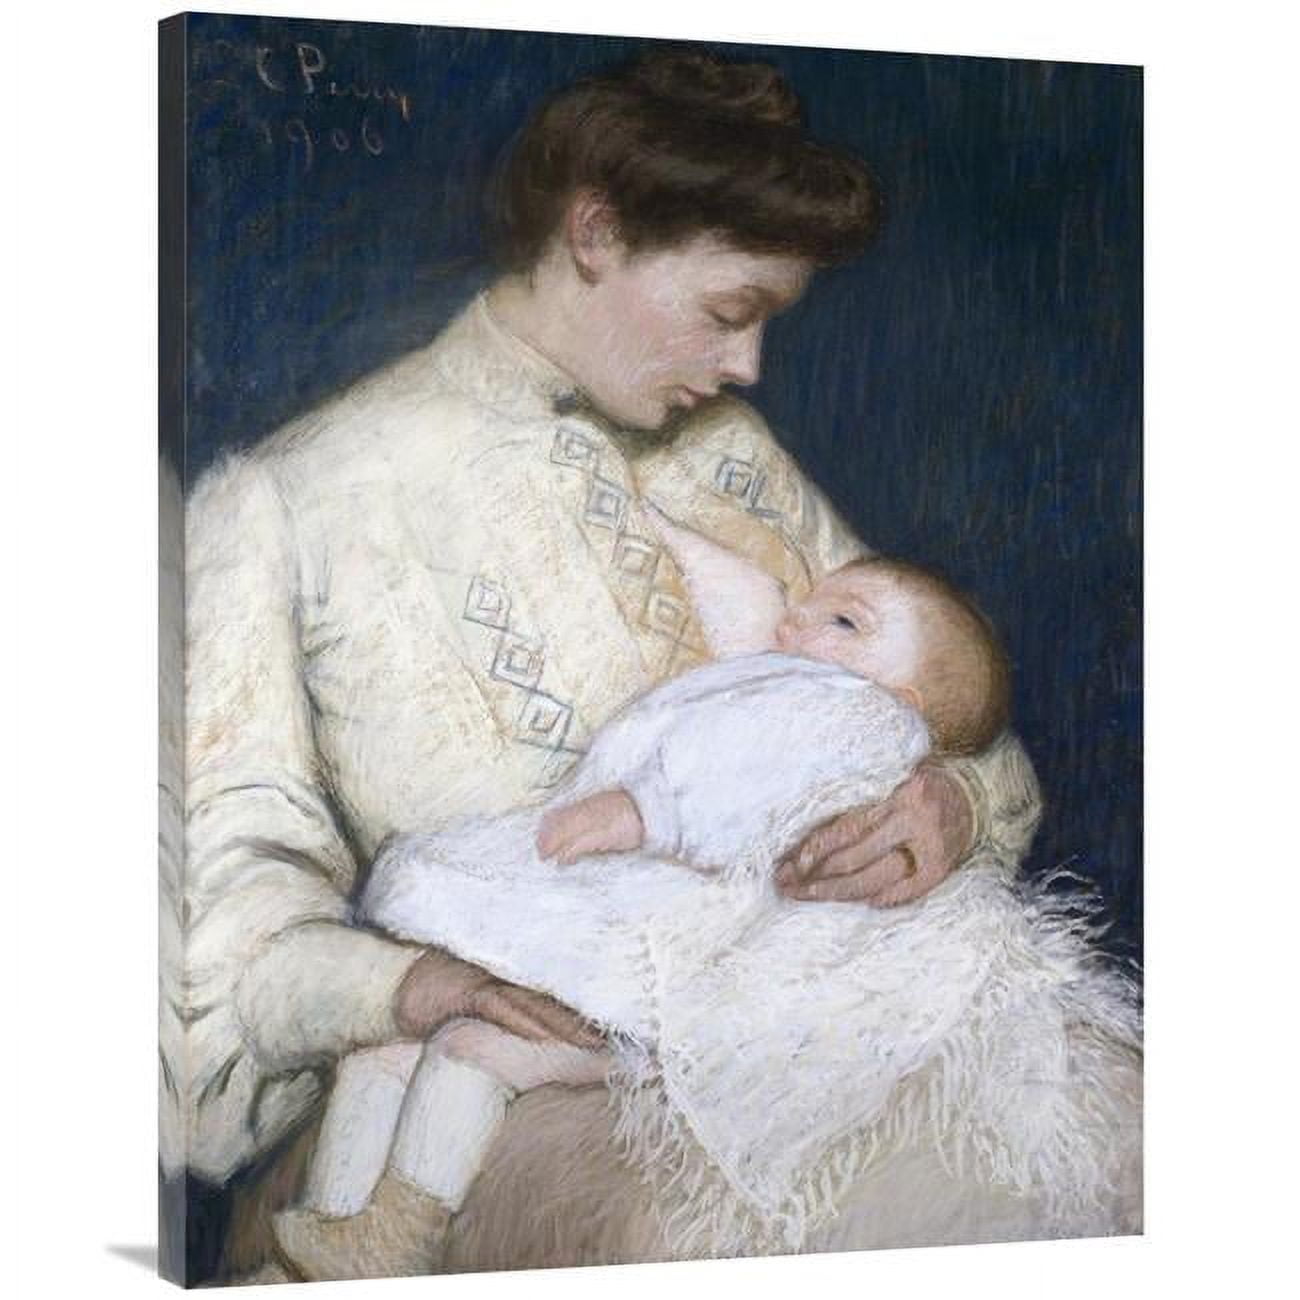 40 in. Nursing the Baby Art Print - Lilla Cabot Perry -  JensenDistributionServices, MI1274269